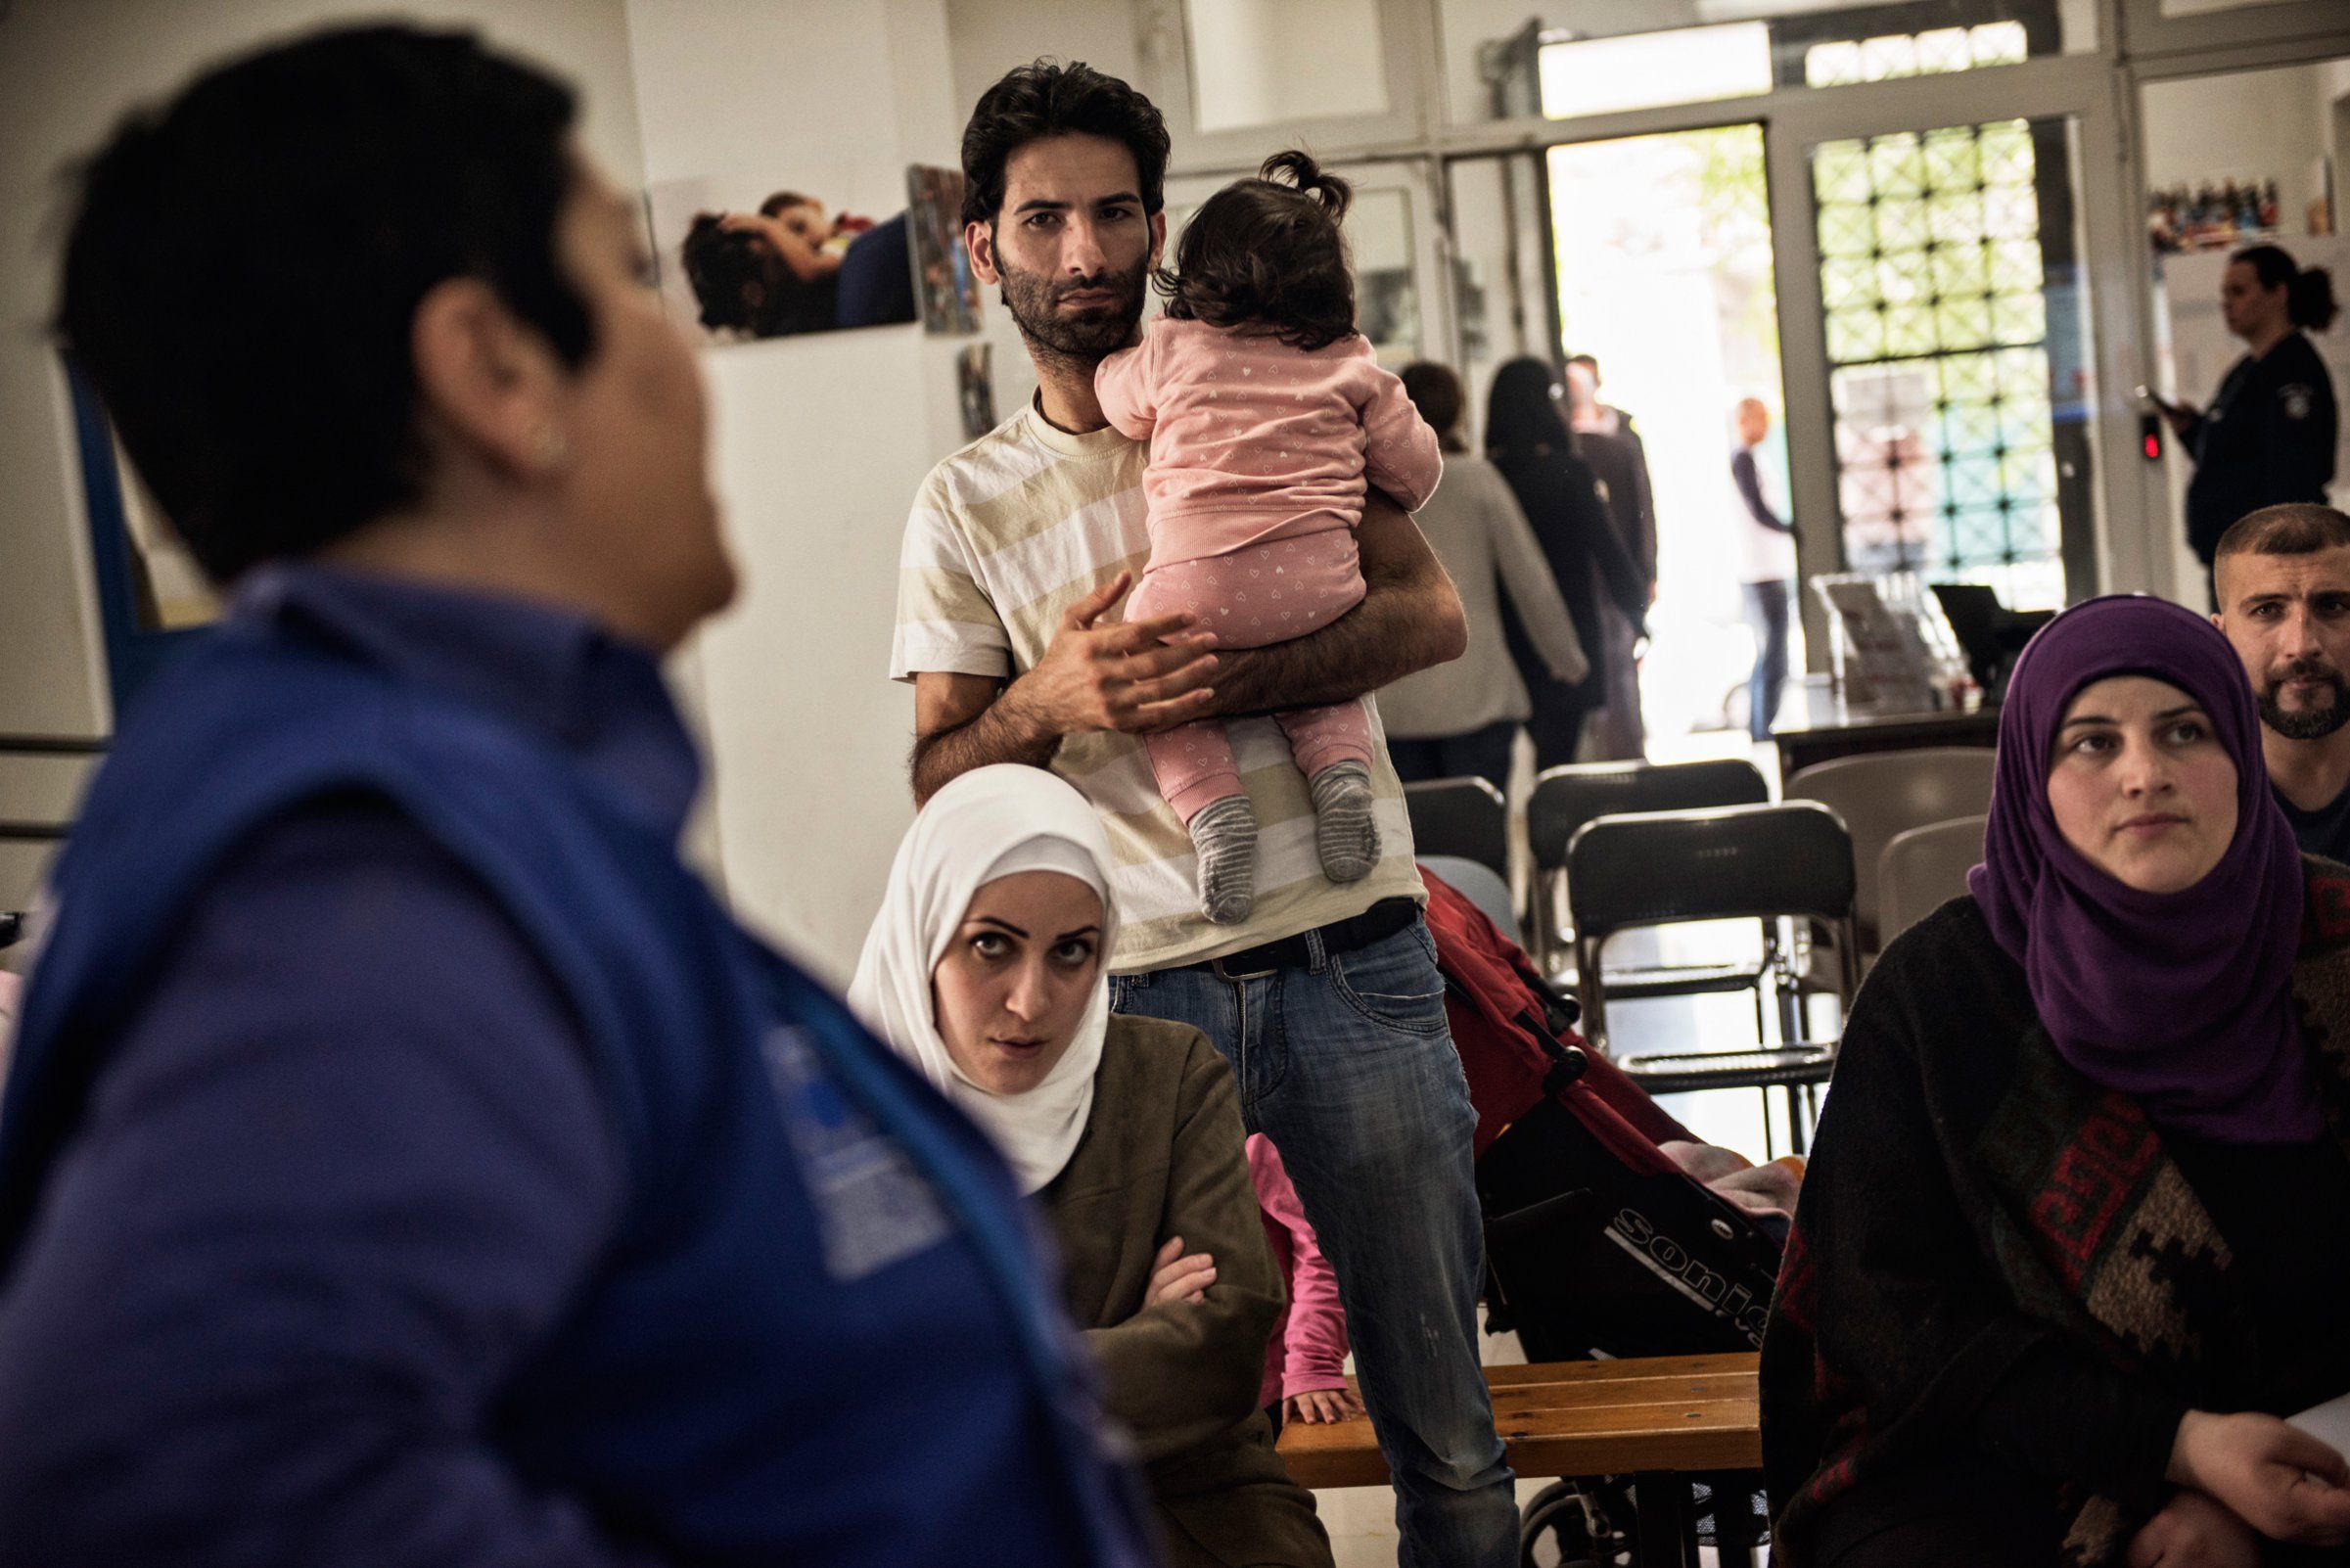 Syrian refugees Taimaa Abzali and her husband Muhanned Abzali, and their six month old daughter, Heln, and son Wael, attend a final orientation meeting at the International Organization for Migration the day before leaving for relocation in Estonia. Image by Lynsey Addario. Greece, 2017.